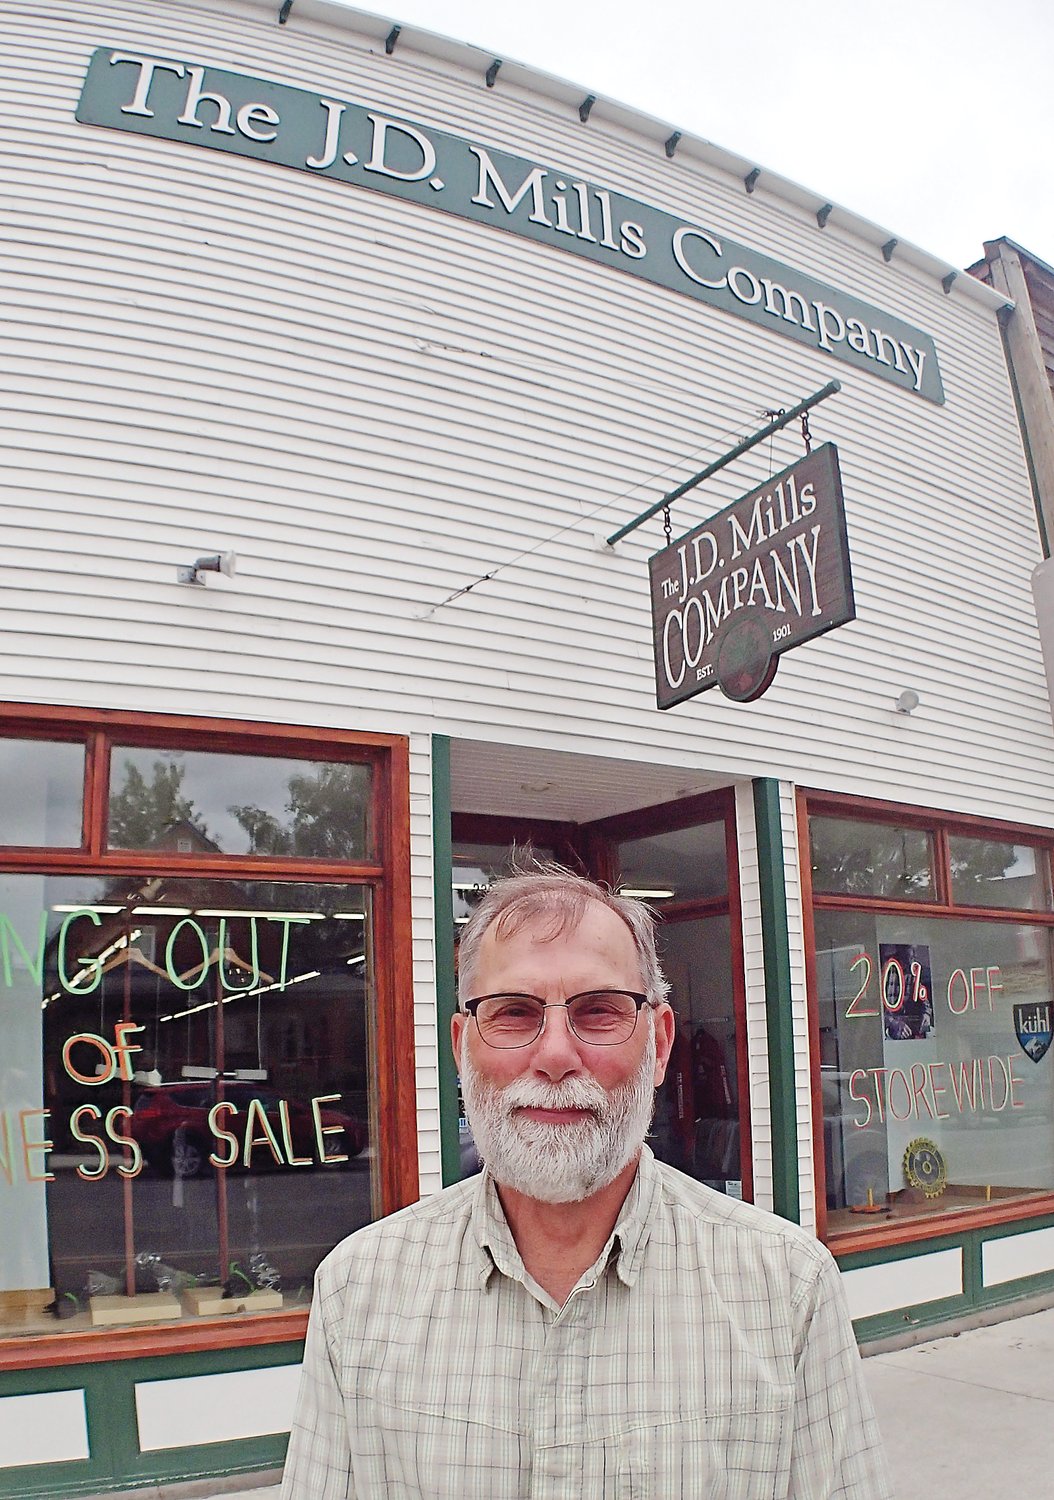 John Mills is the fourth owner of the 120-year-old Ely clothing business. The store will close by the end of July.